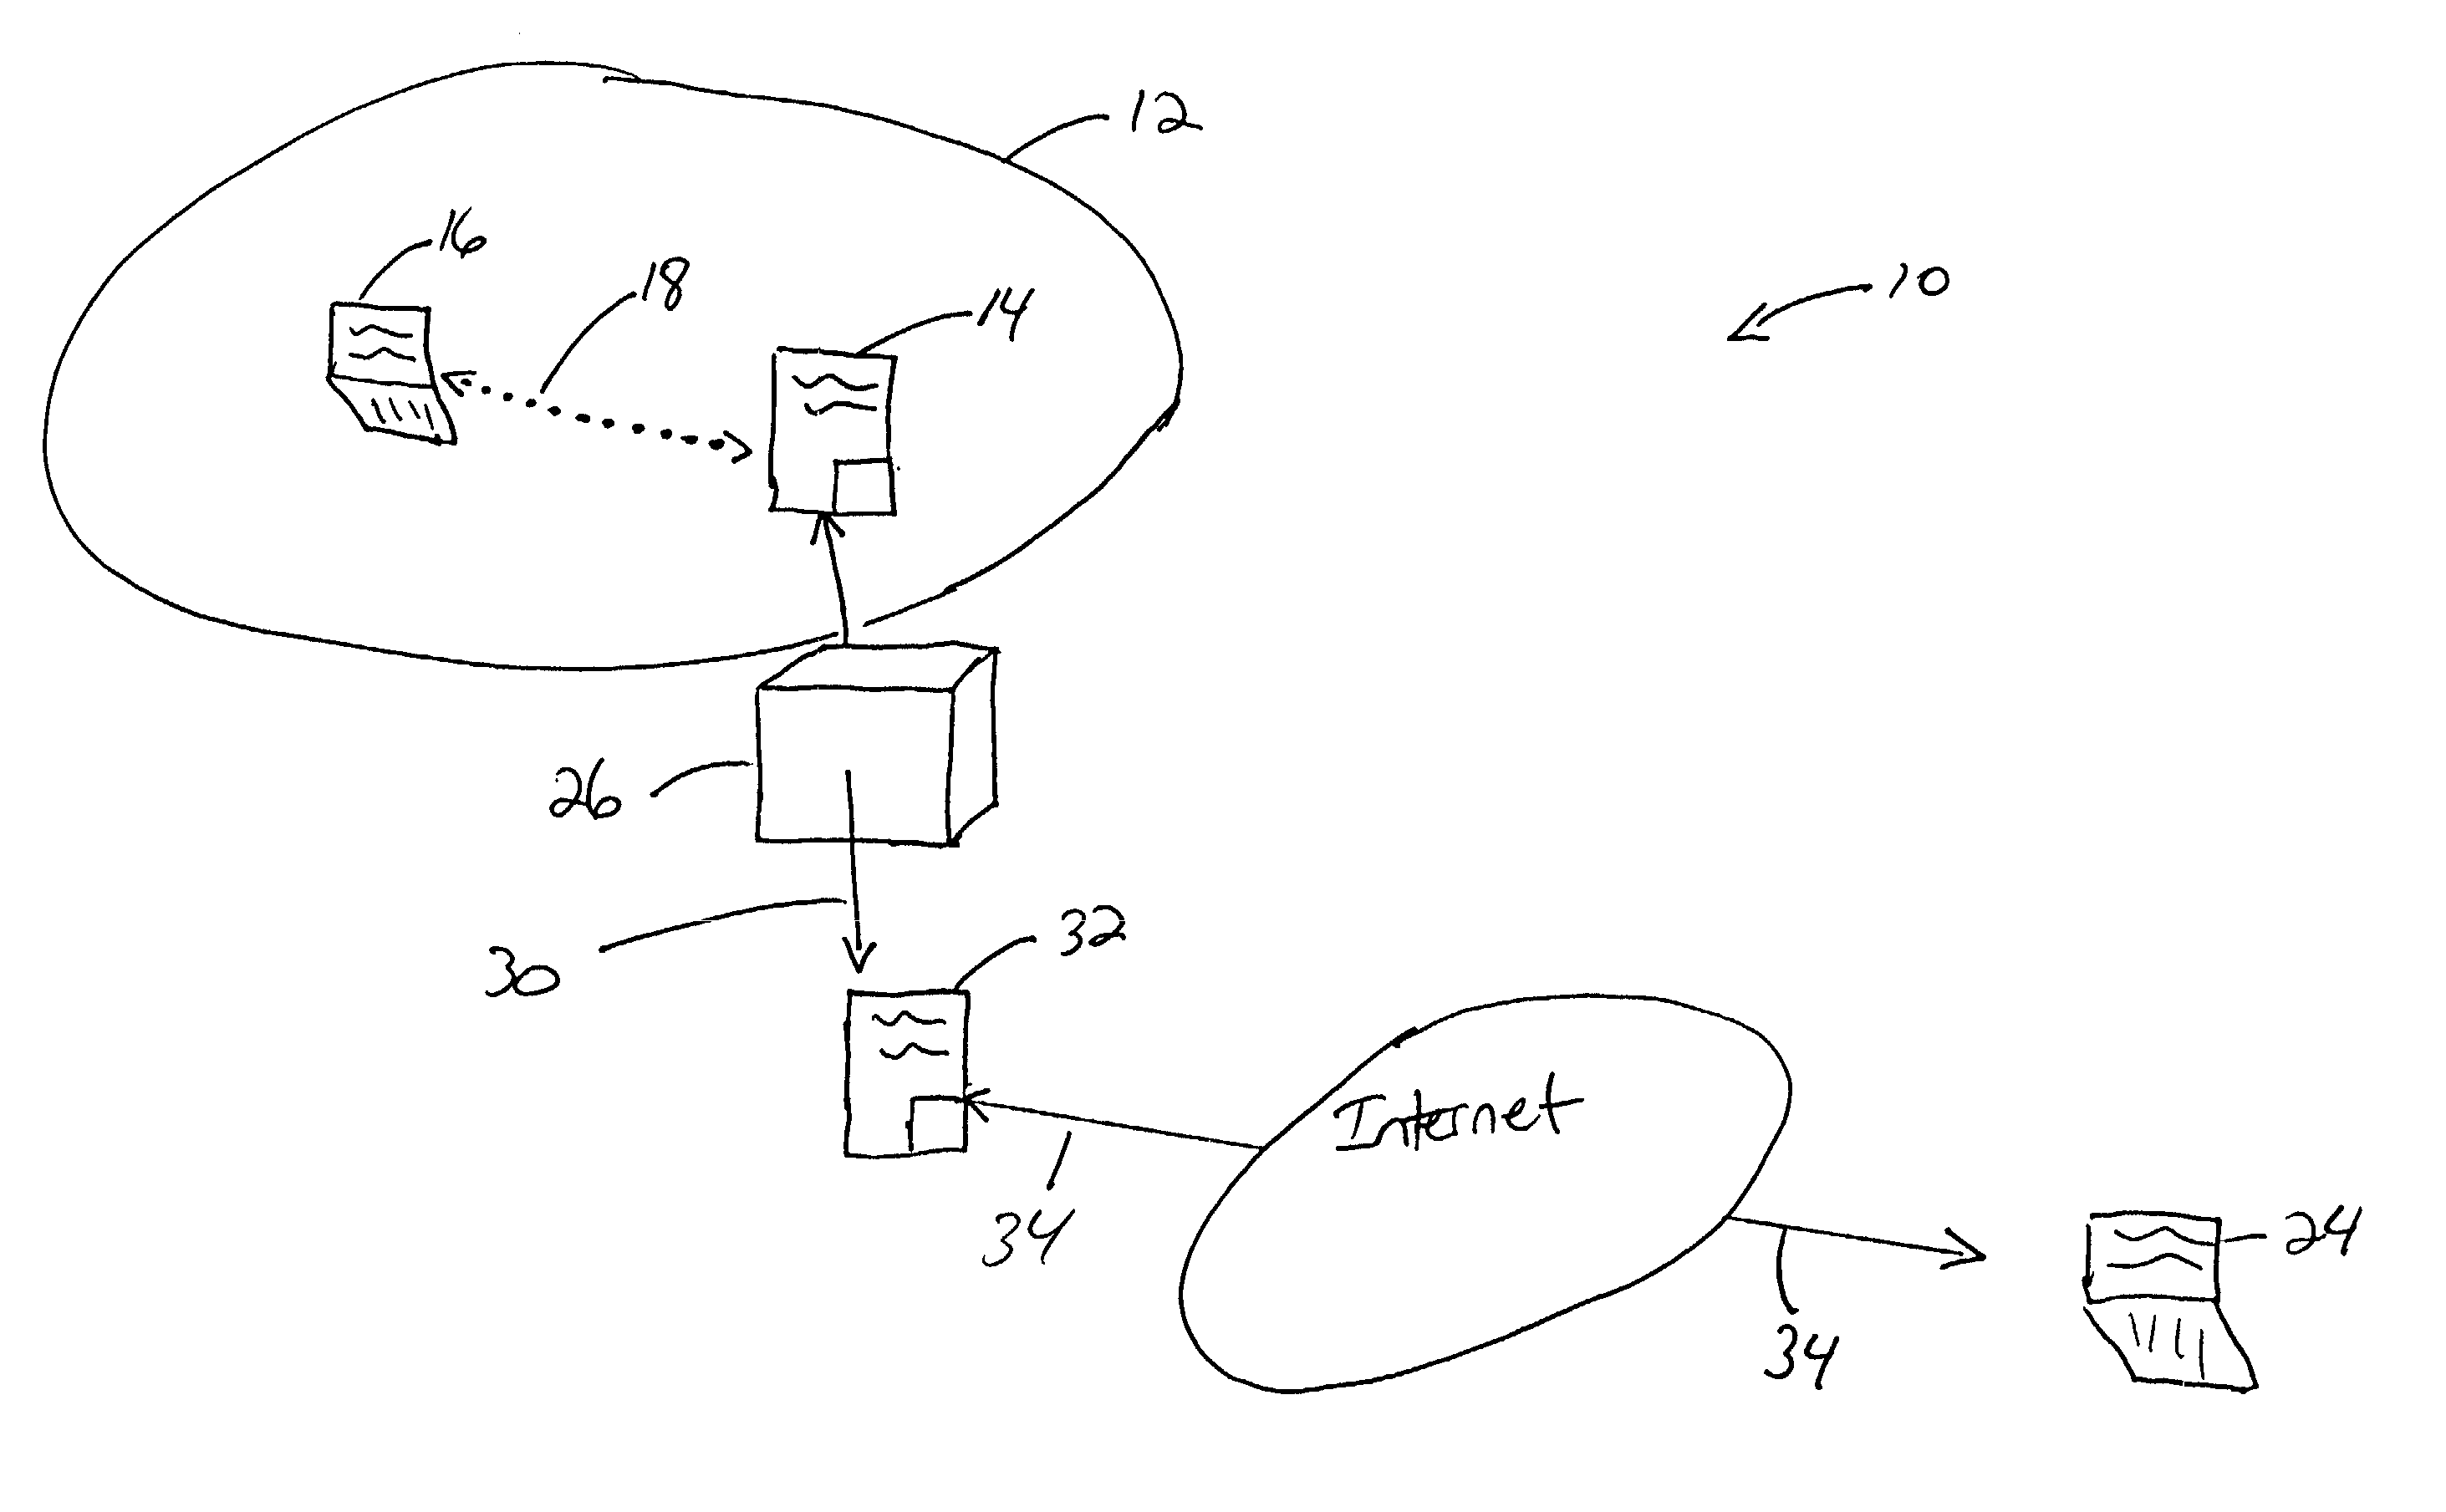 System and method for secure network mobility